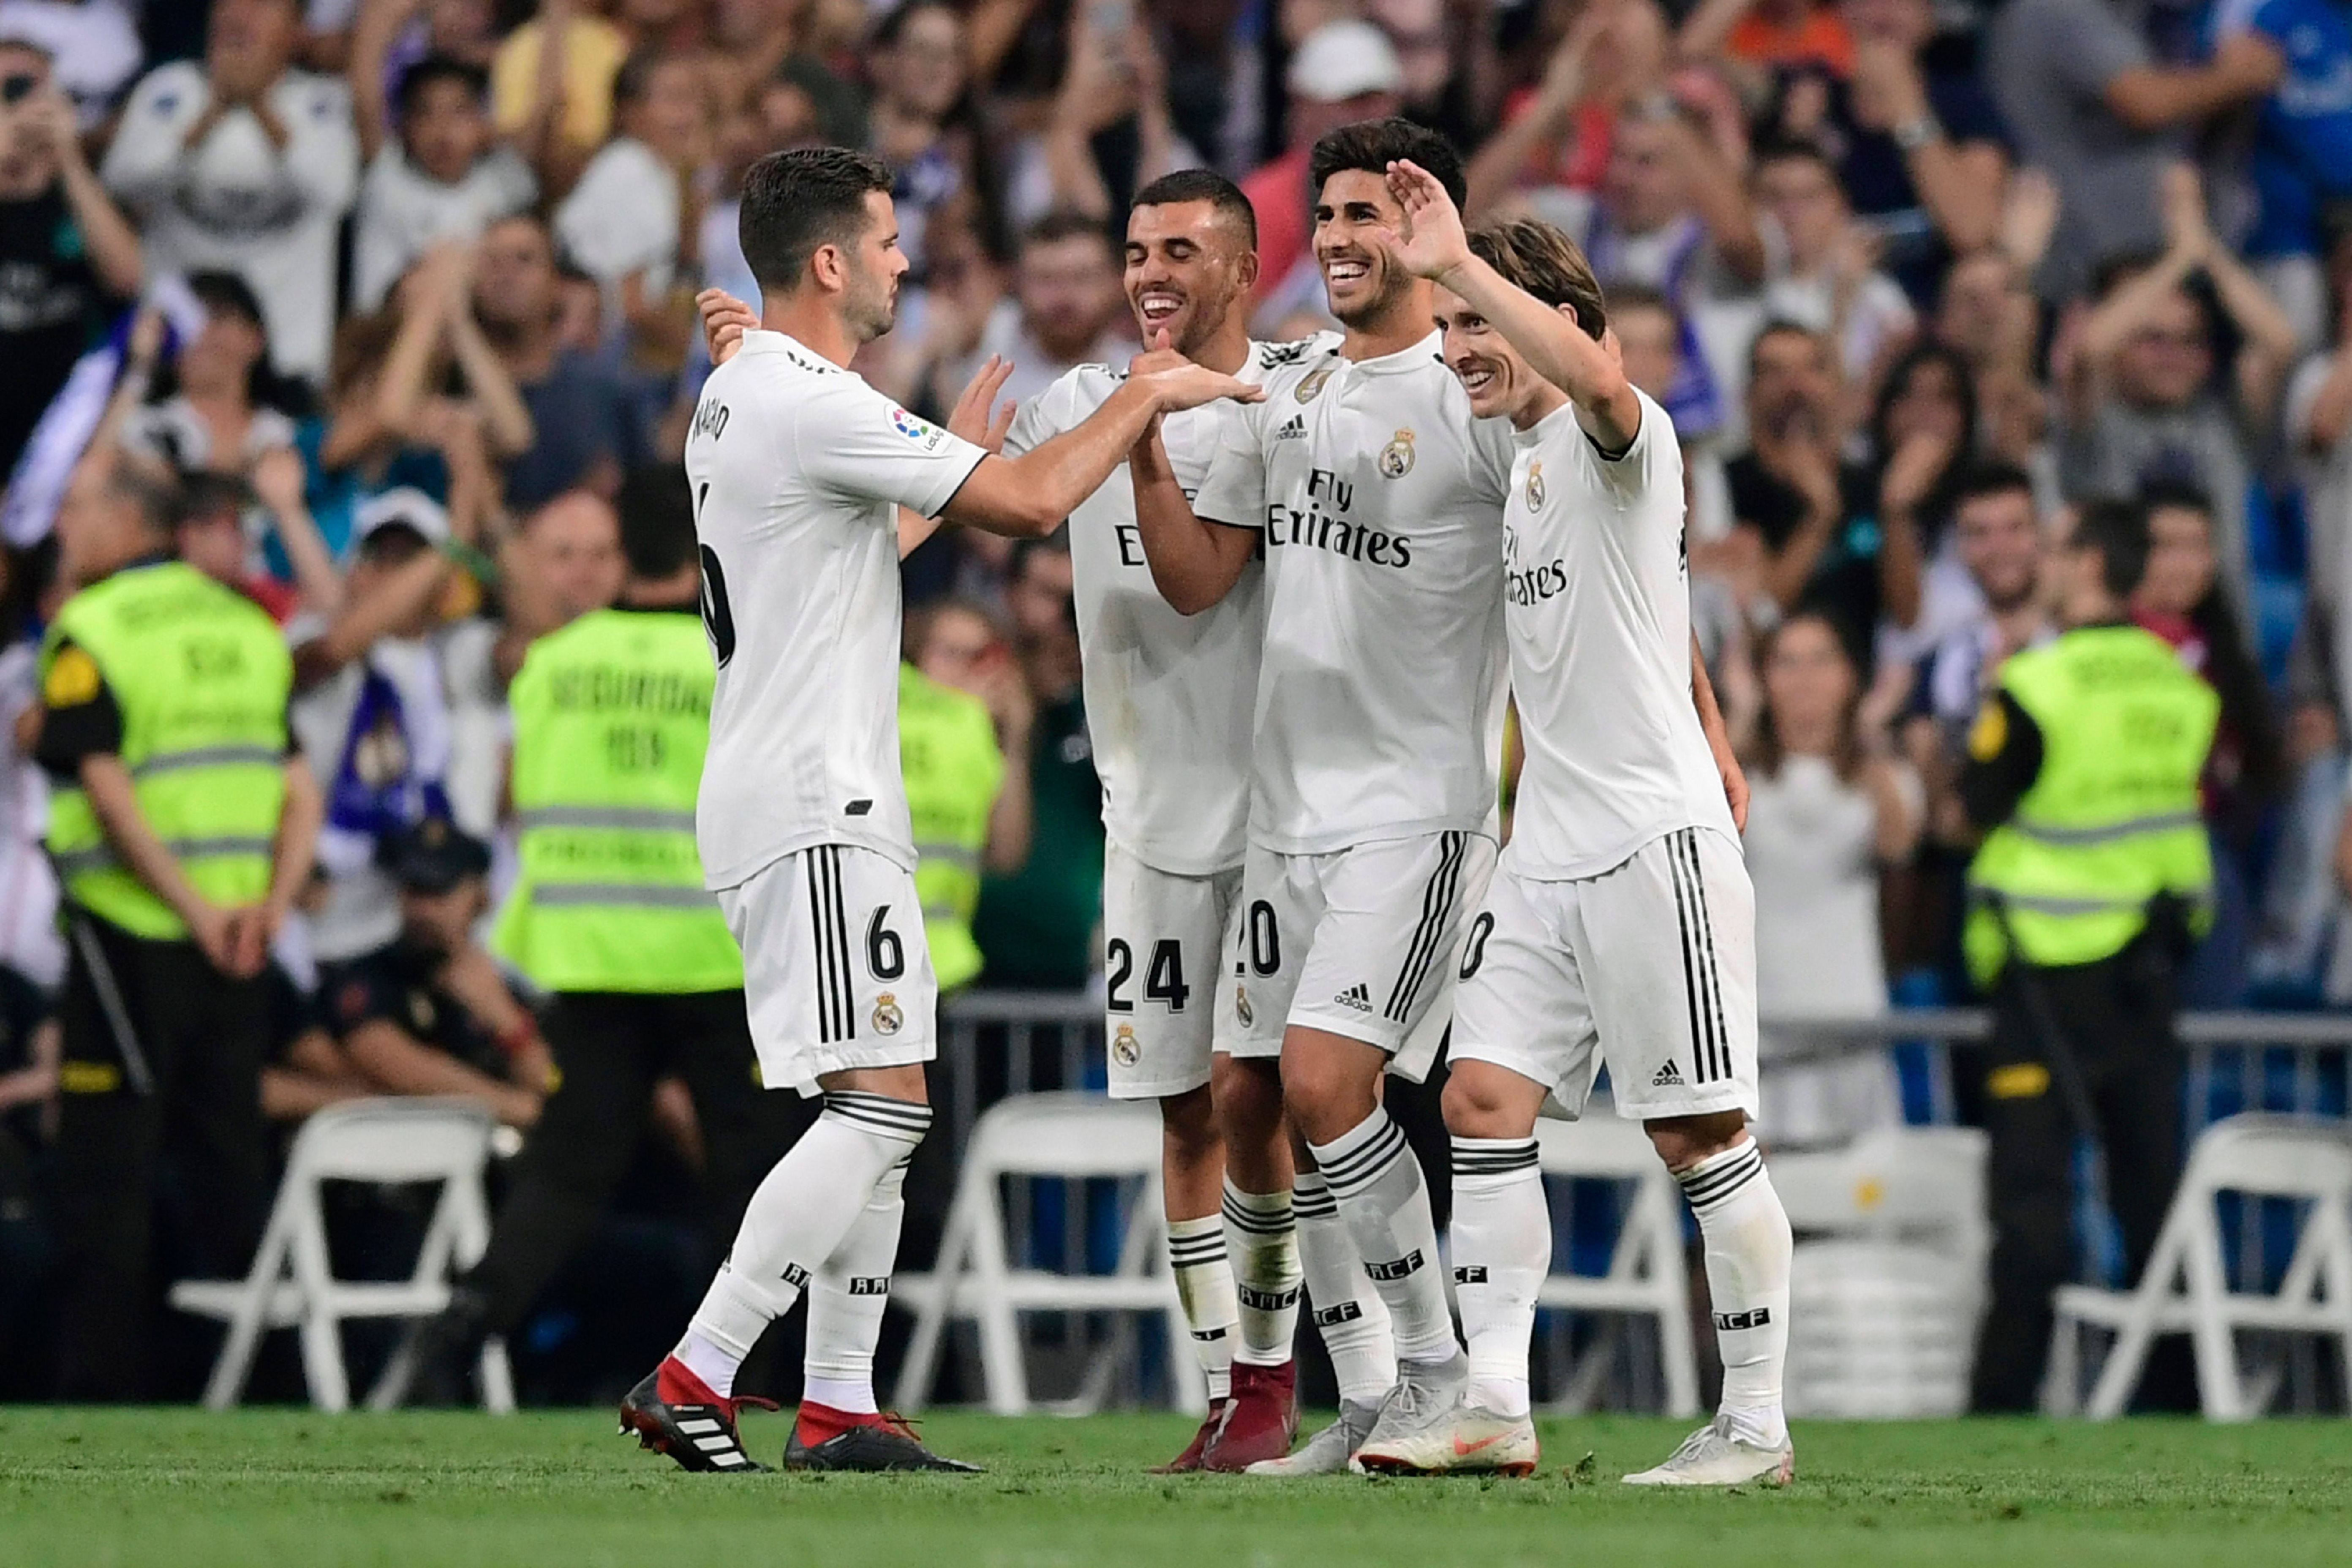 Real Madrid's Spanish midfielder Marco Asensio (C) celebrates with teammtes after scoring during the Spanish league football match between Real Madrid CF and RCD Espanyol at the Santiago Bernabeu stadium in Madrid on September 22, 2018. (Photo by JAVIER SORIANO / AFP)        (Photo credit should read JAVIER SORIANO/AFP/Getty Images)